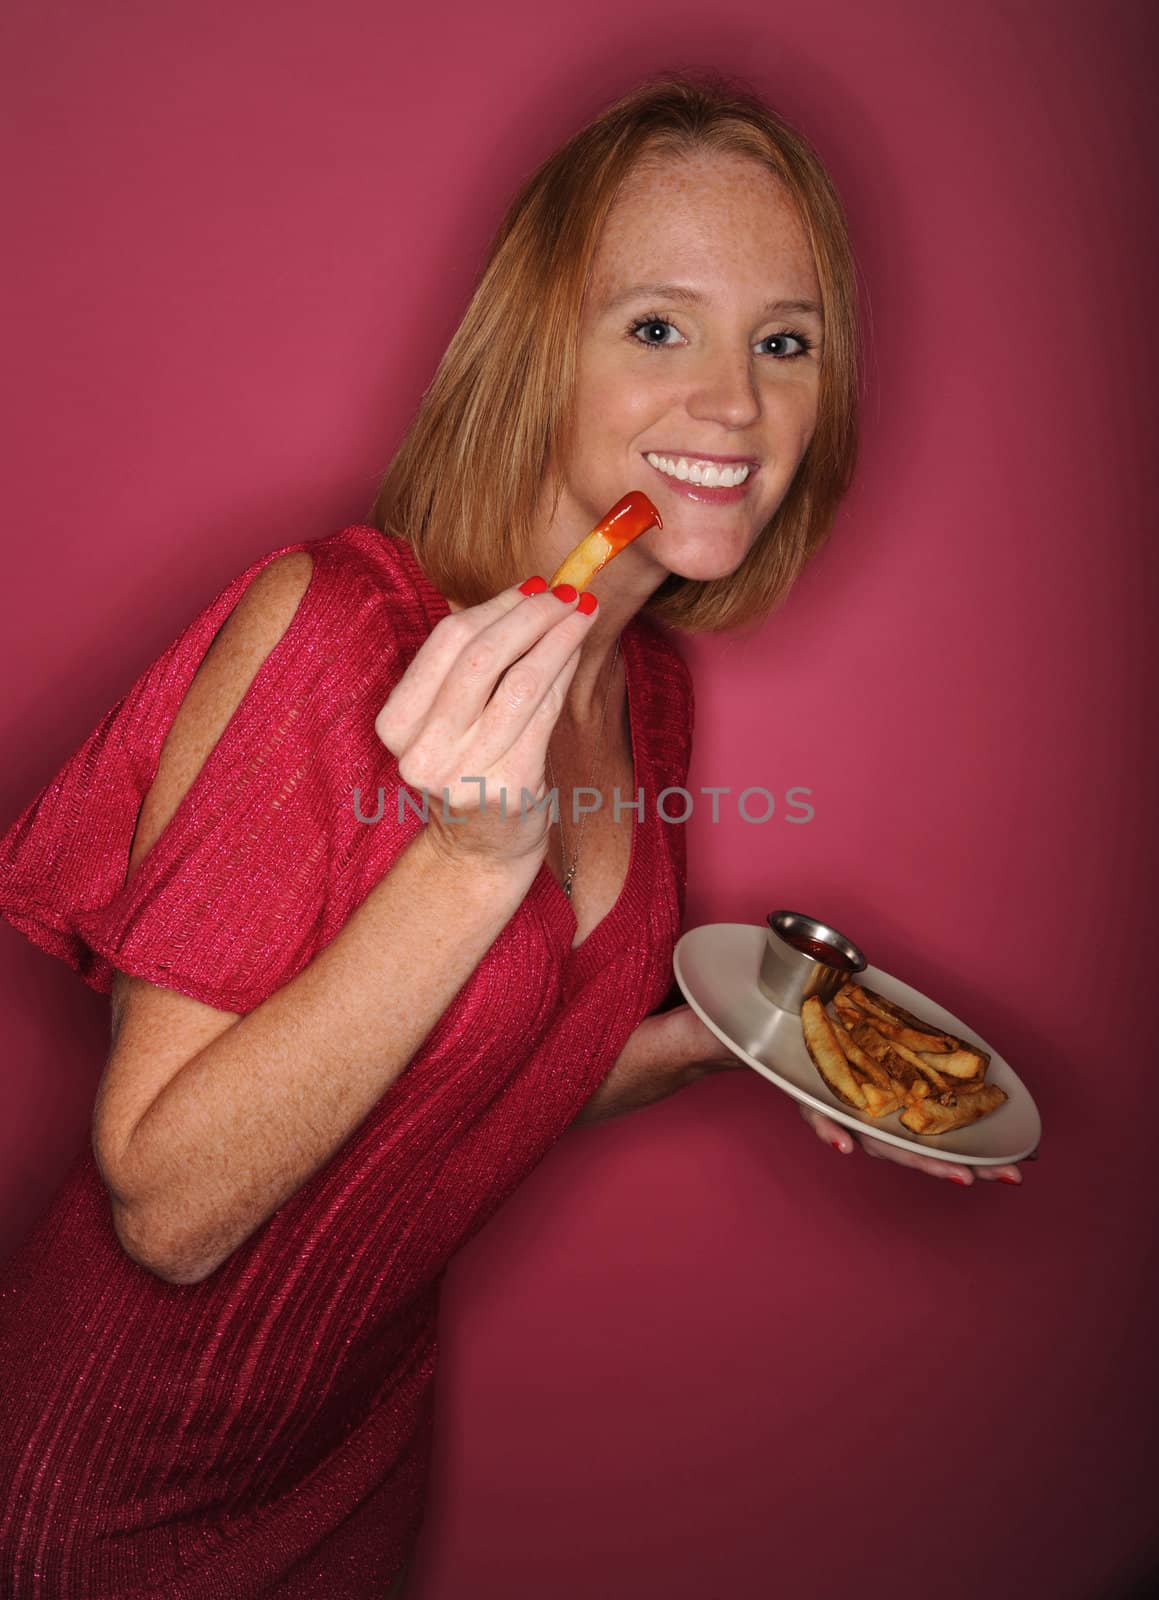 Attrractive woman eating junk food on a pink background